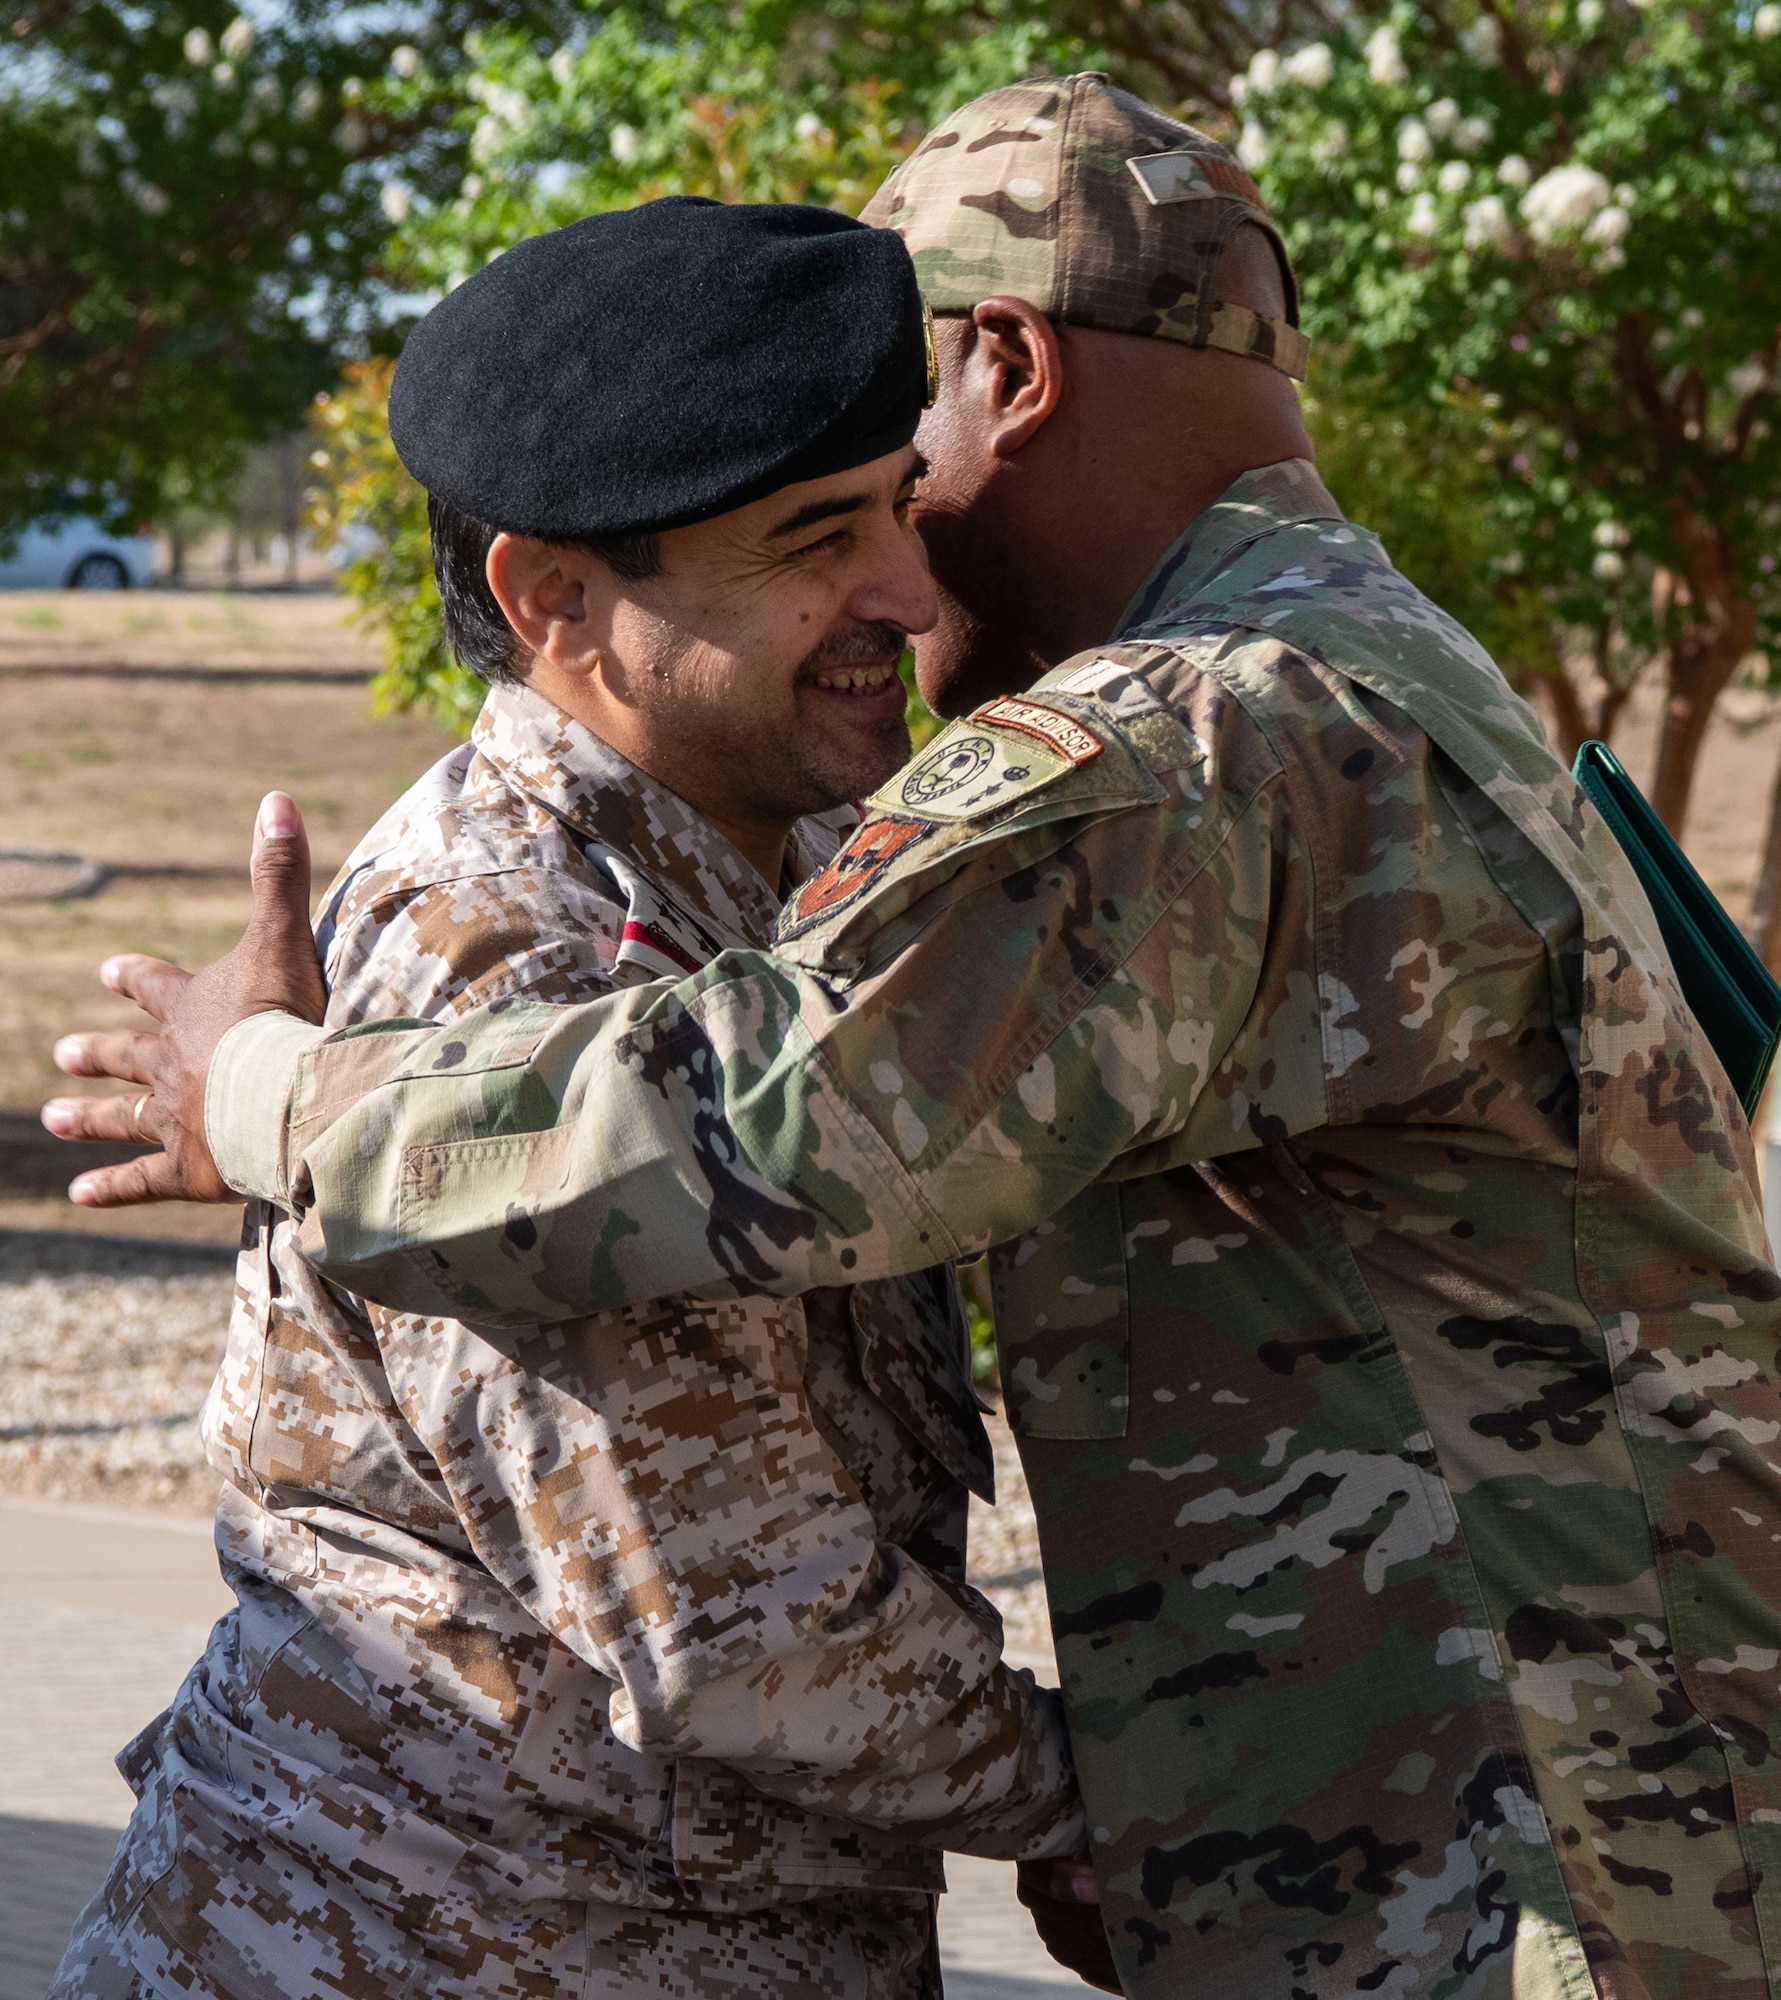 Royal Saudi Air Forces Commodore Al Mutairi Sattam Thaib, Armed Forces Intel and Security Institute commander, embraces U.S. Air Force Col. Euguene Moore III, 17th Mission Support Group commander, Goodfellow Air Force Base, May 18, 2022. Members of the RSAF visited Goodfellow AFB to learn about the joint and coalition forces intelligence, surveillance, and reconnaissance training provided by the 17th Training Wing. (U.S. Air Force Photo by Senior Airman Michael Bowman)